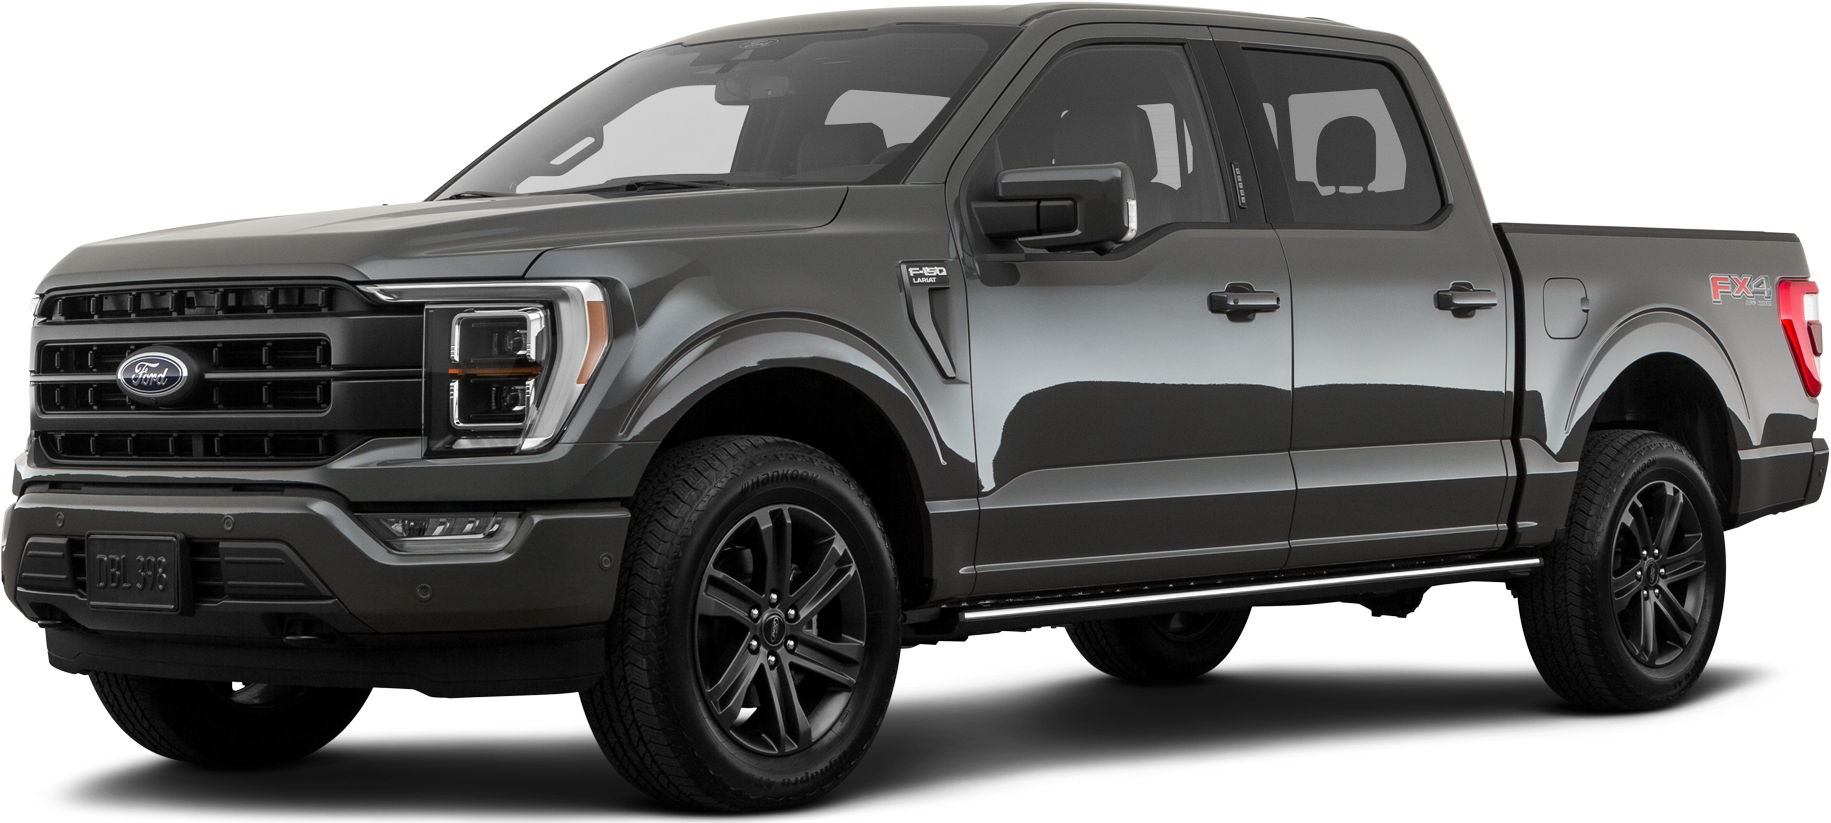 New 2021 Ford F150 SuperCrew Cab Reviews, Pricing & Specs | Kelley Blue